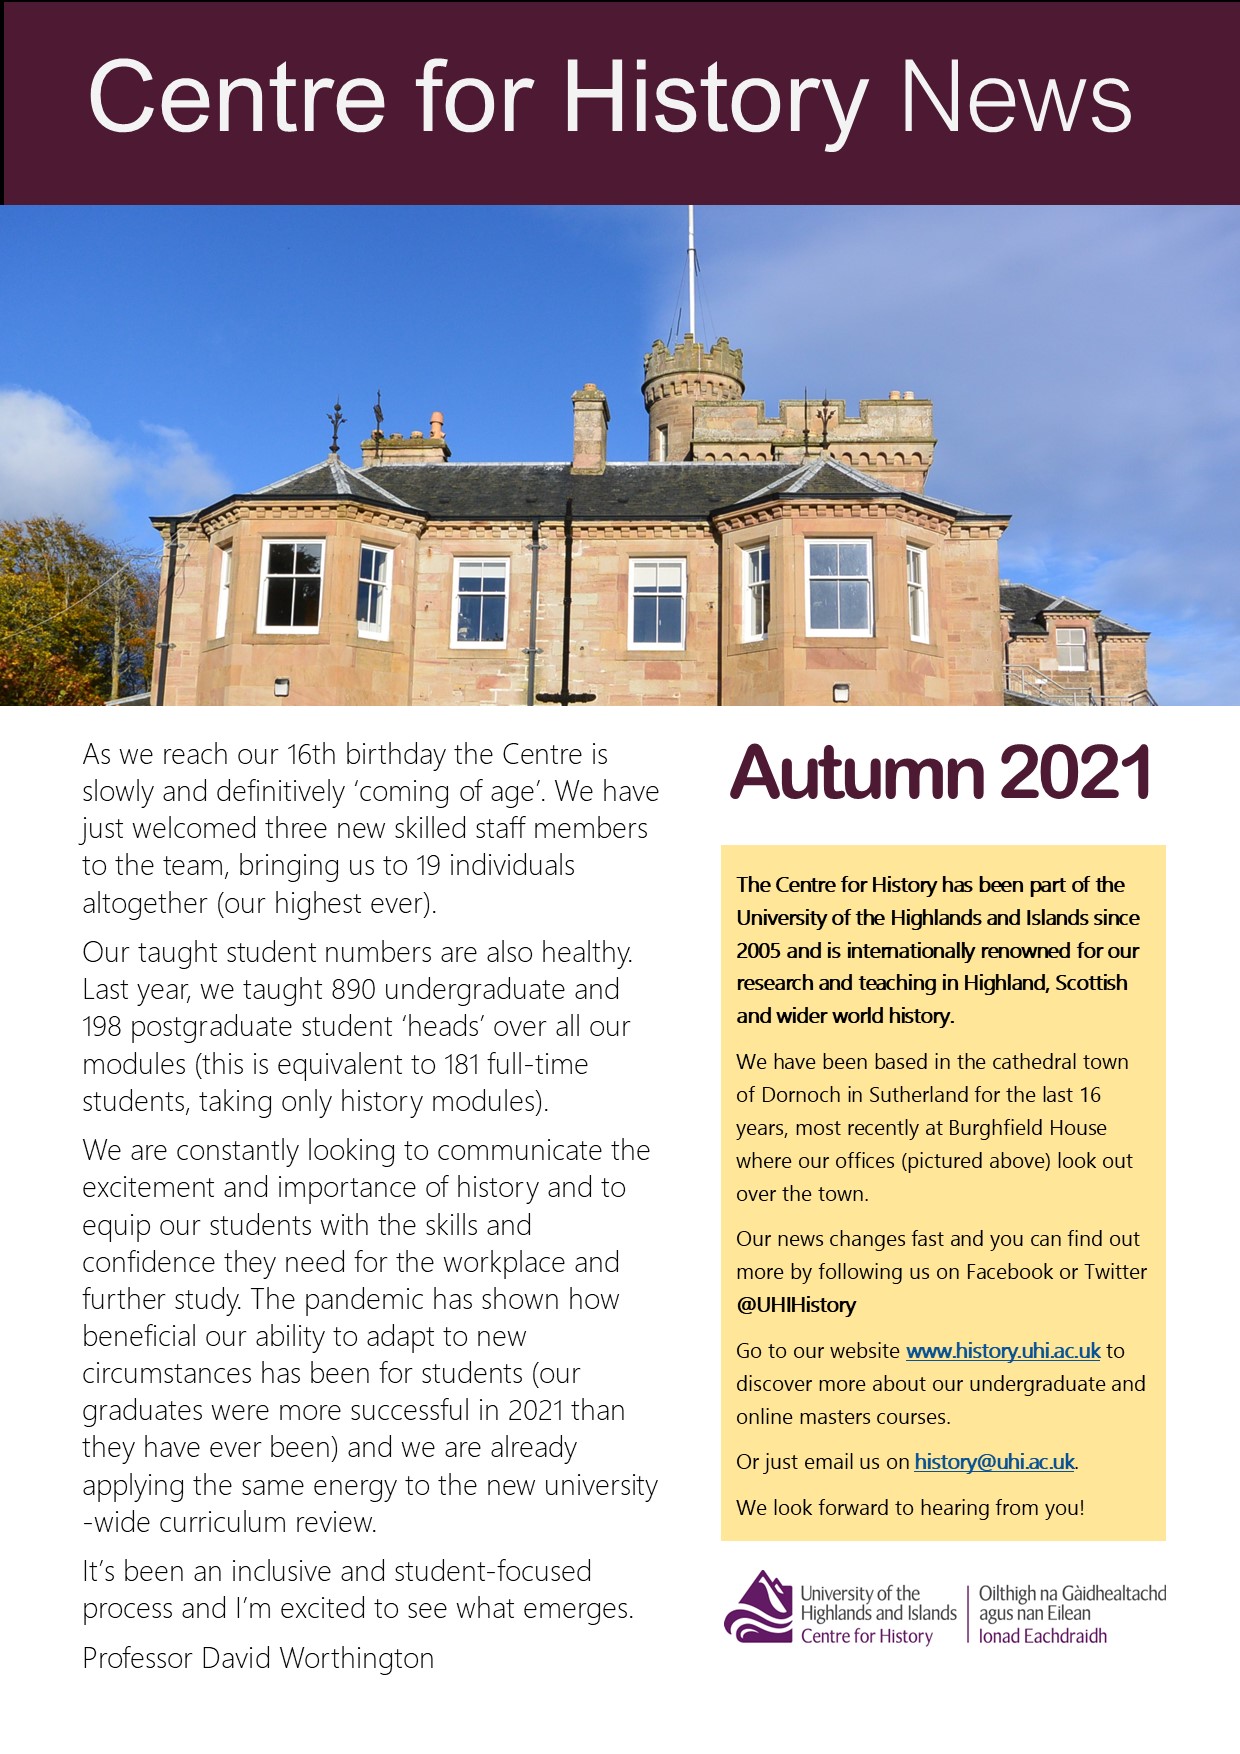 Centre for History news - Autumn 2021